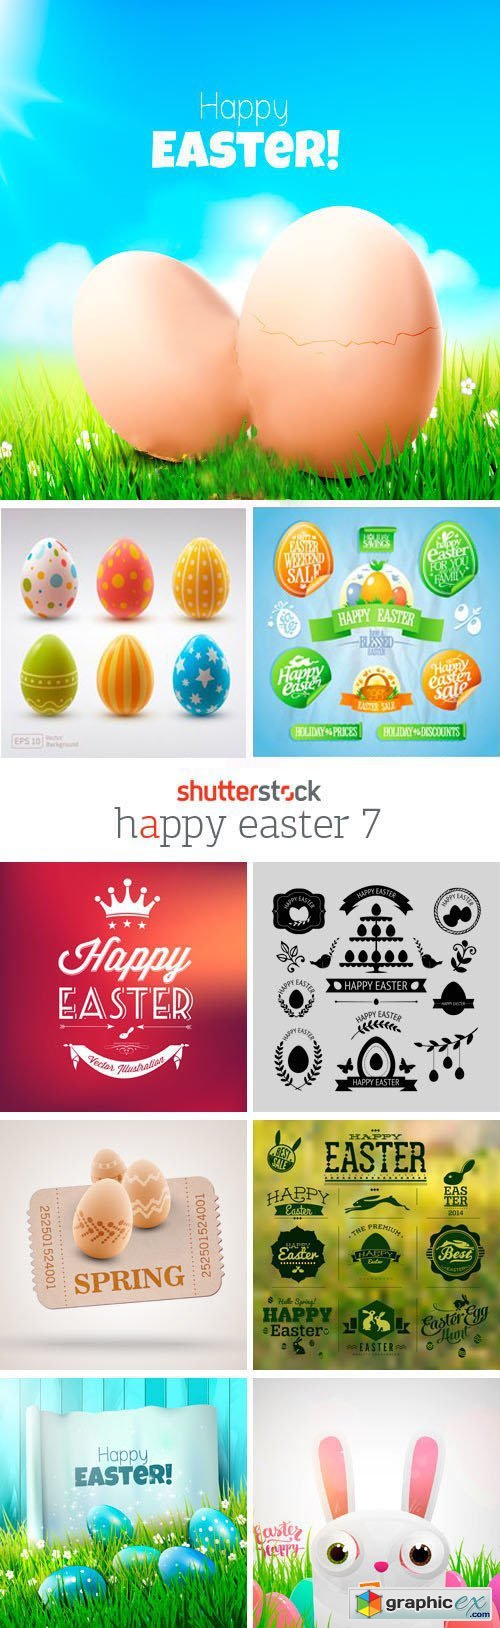 Amazing SS - Happy Easter 7, 25xEPS